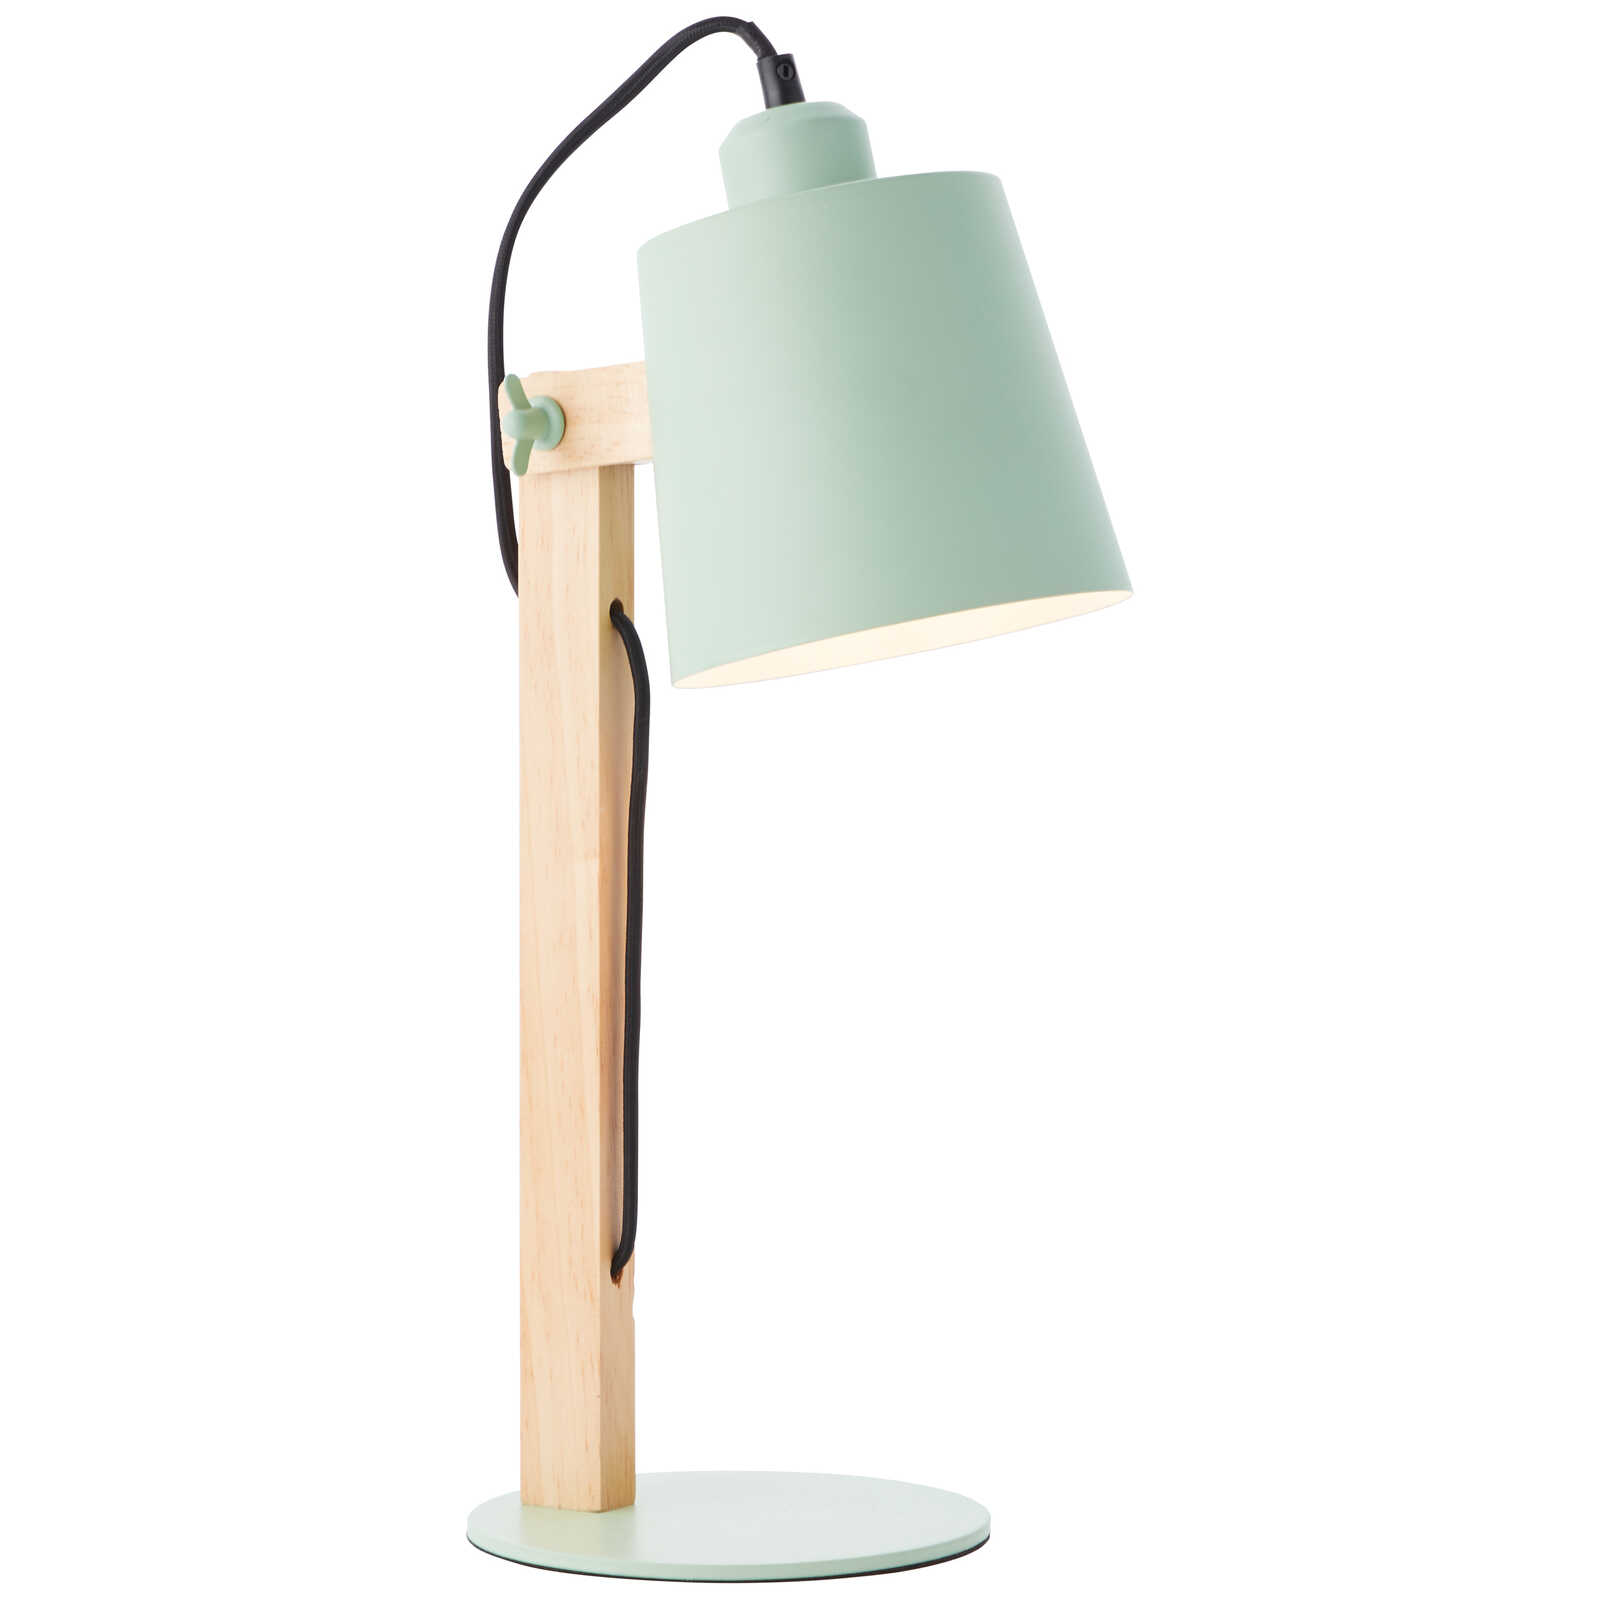             Wooden table lamp - Paul 1 - Green
        